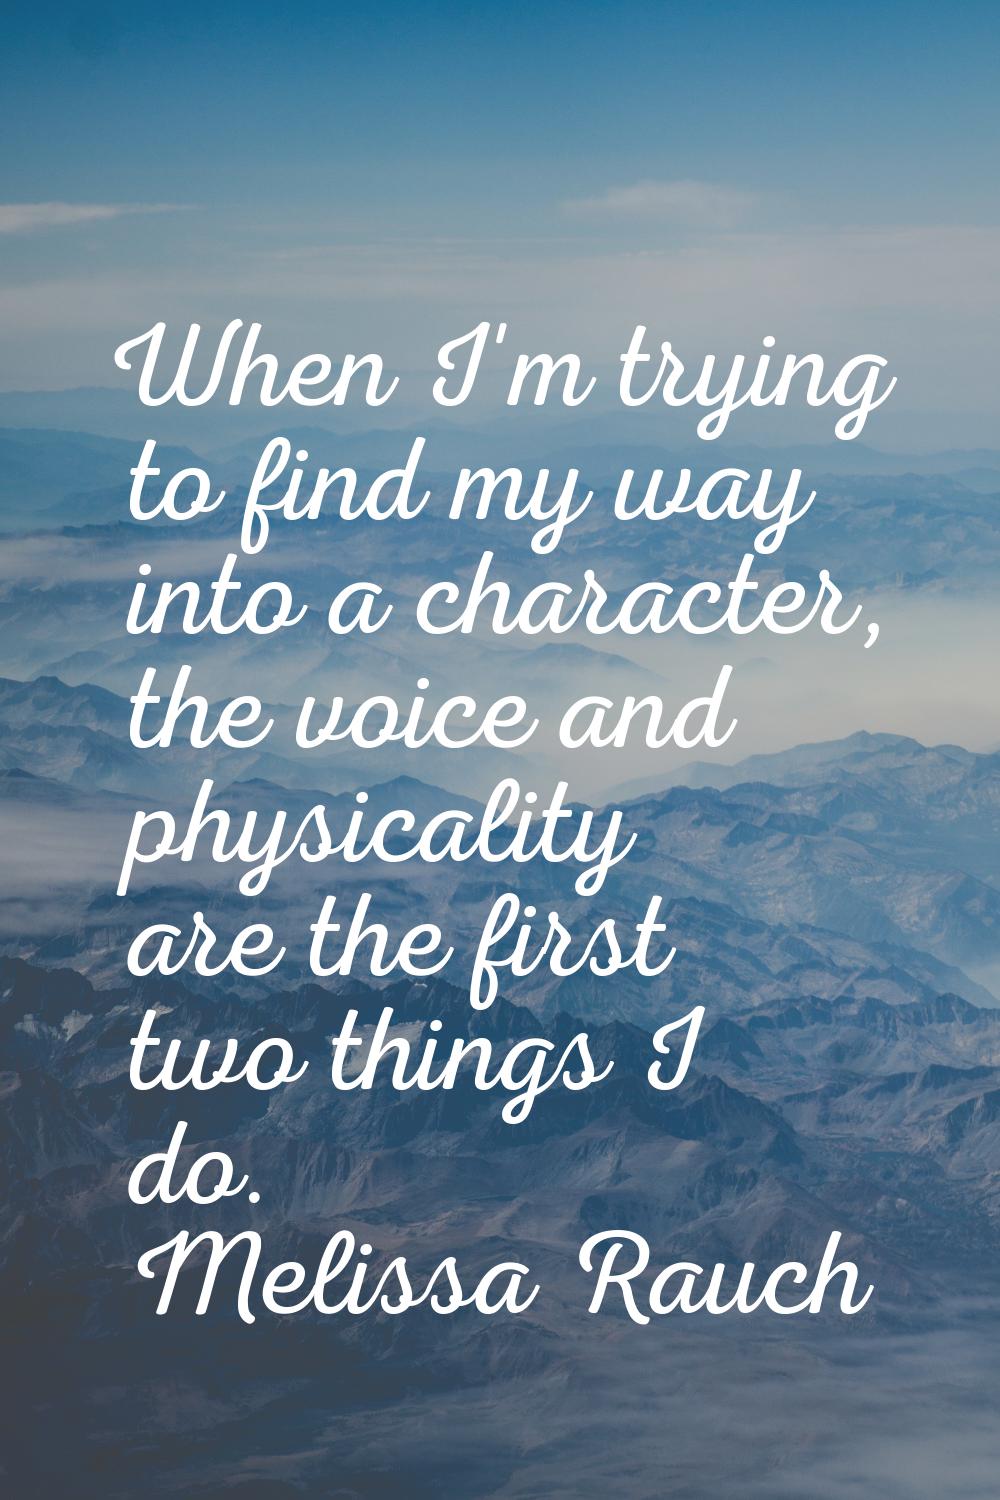 When I'm trying to find my way into a character, the voice and physicality are the first two things